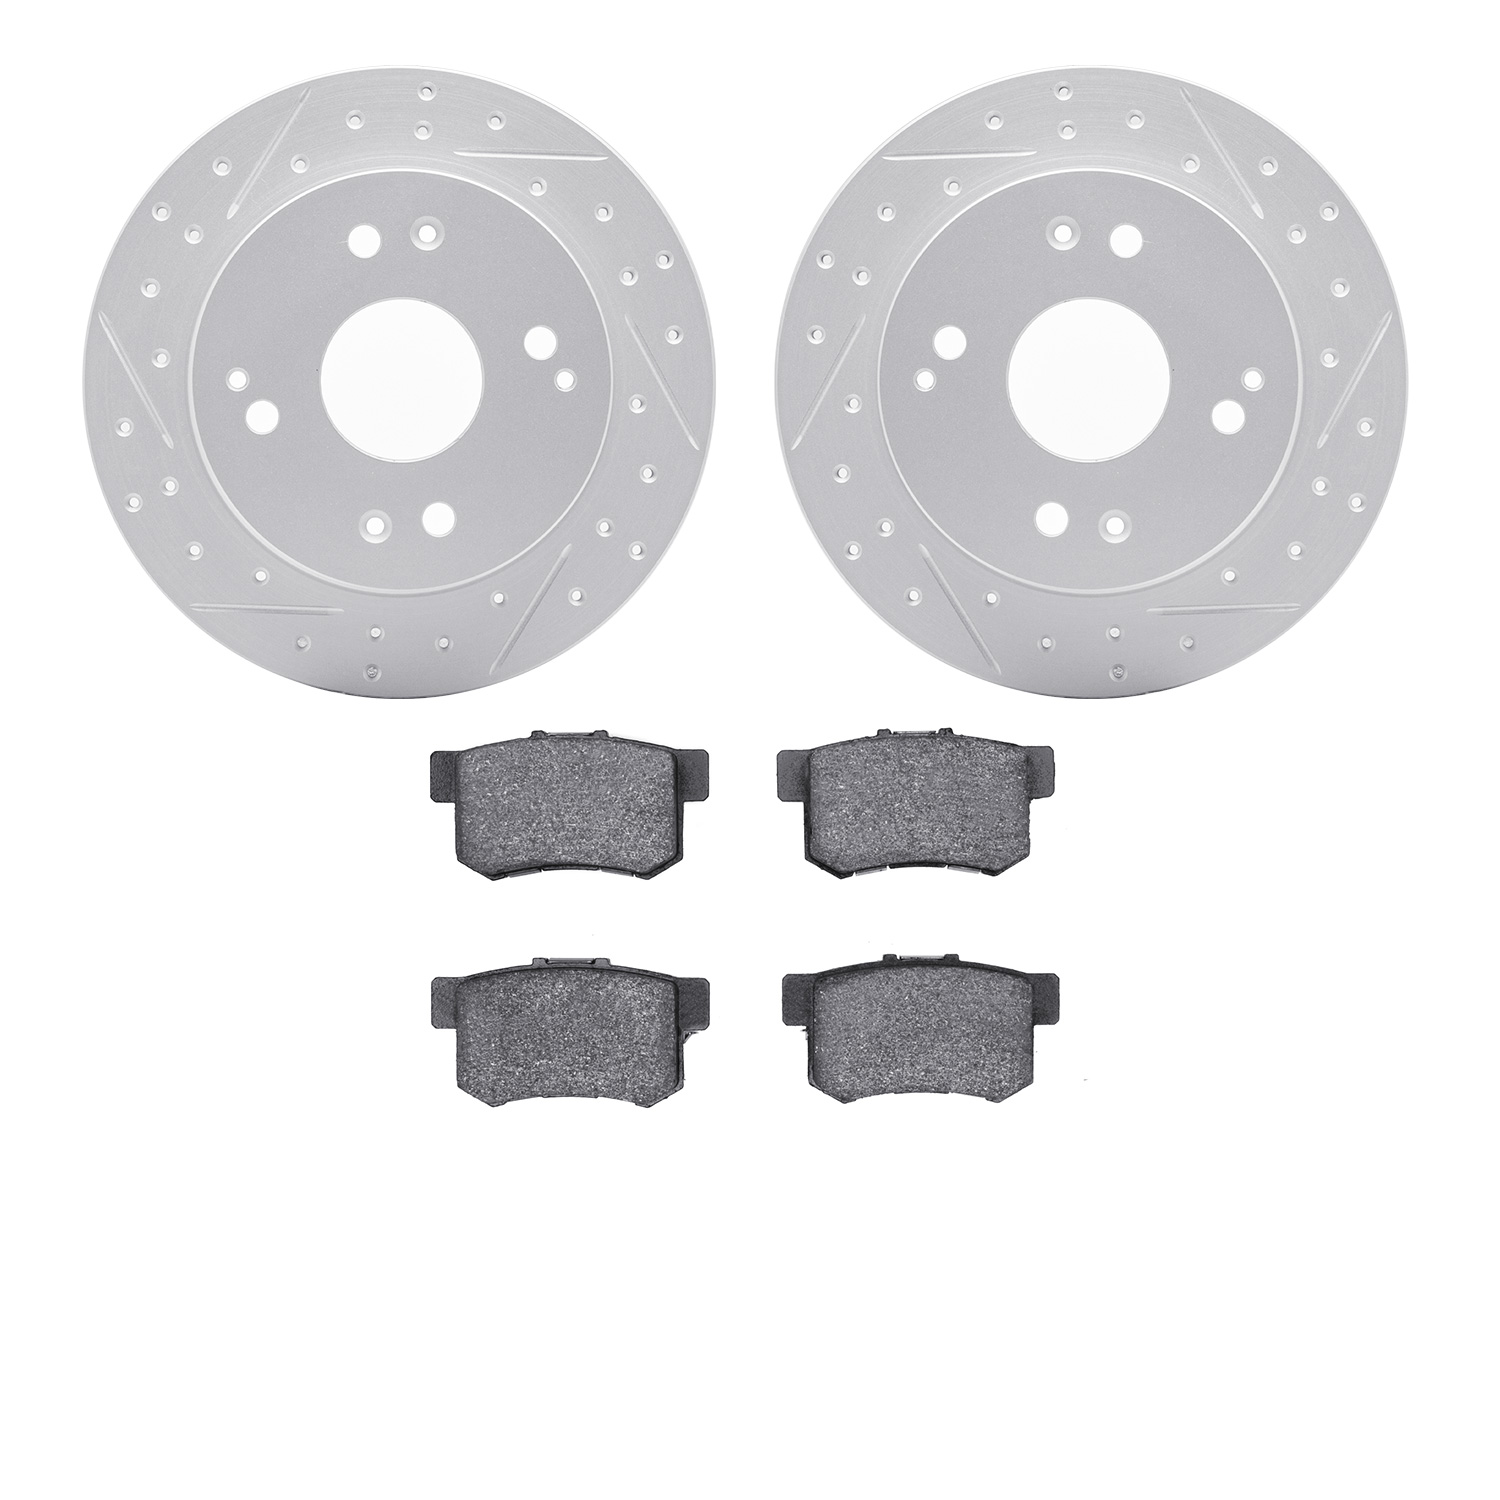 2502-59017 Geoperformance Drilled/Slotted Rotors w/5000 Advanced Brake Pads Kit, 1992-1997 Acura/Honda, Position: Rear